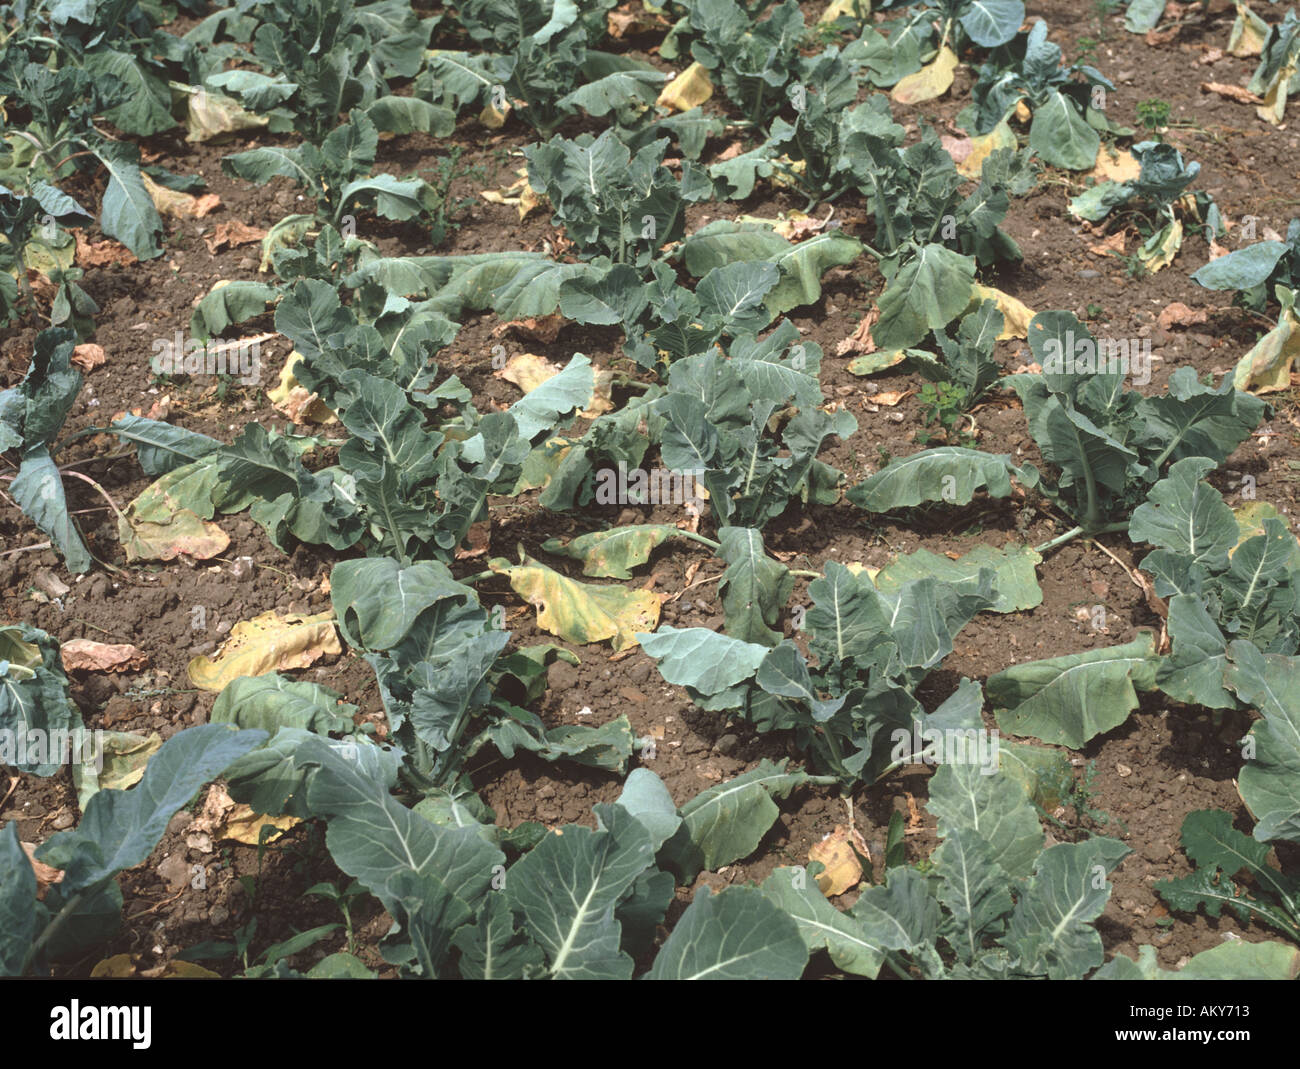 Brassica plants brussels sprouts dying because of clubroot Plasmodiophora brassicae fungal infection on the roots Stock Photo